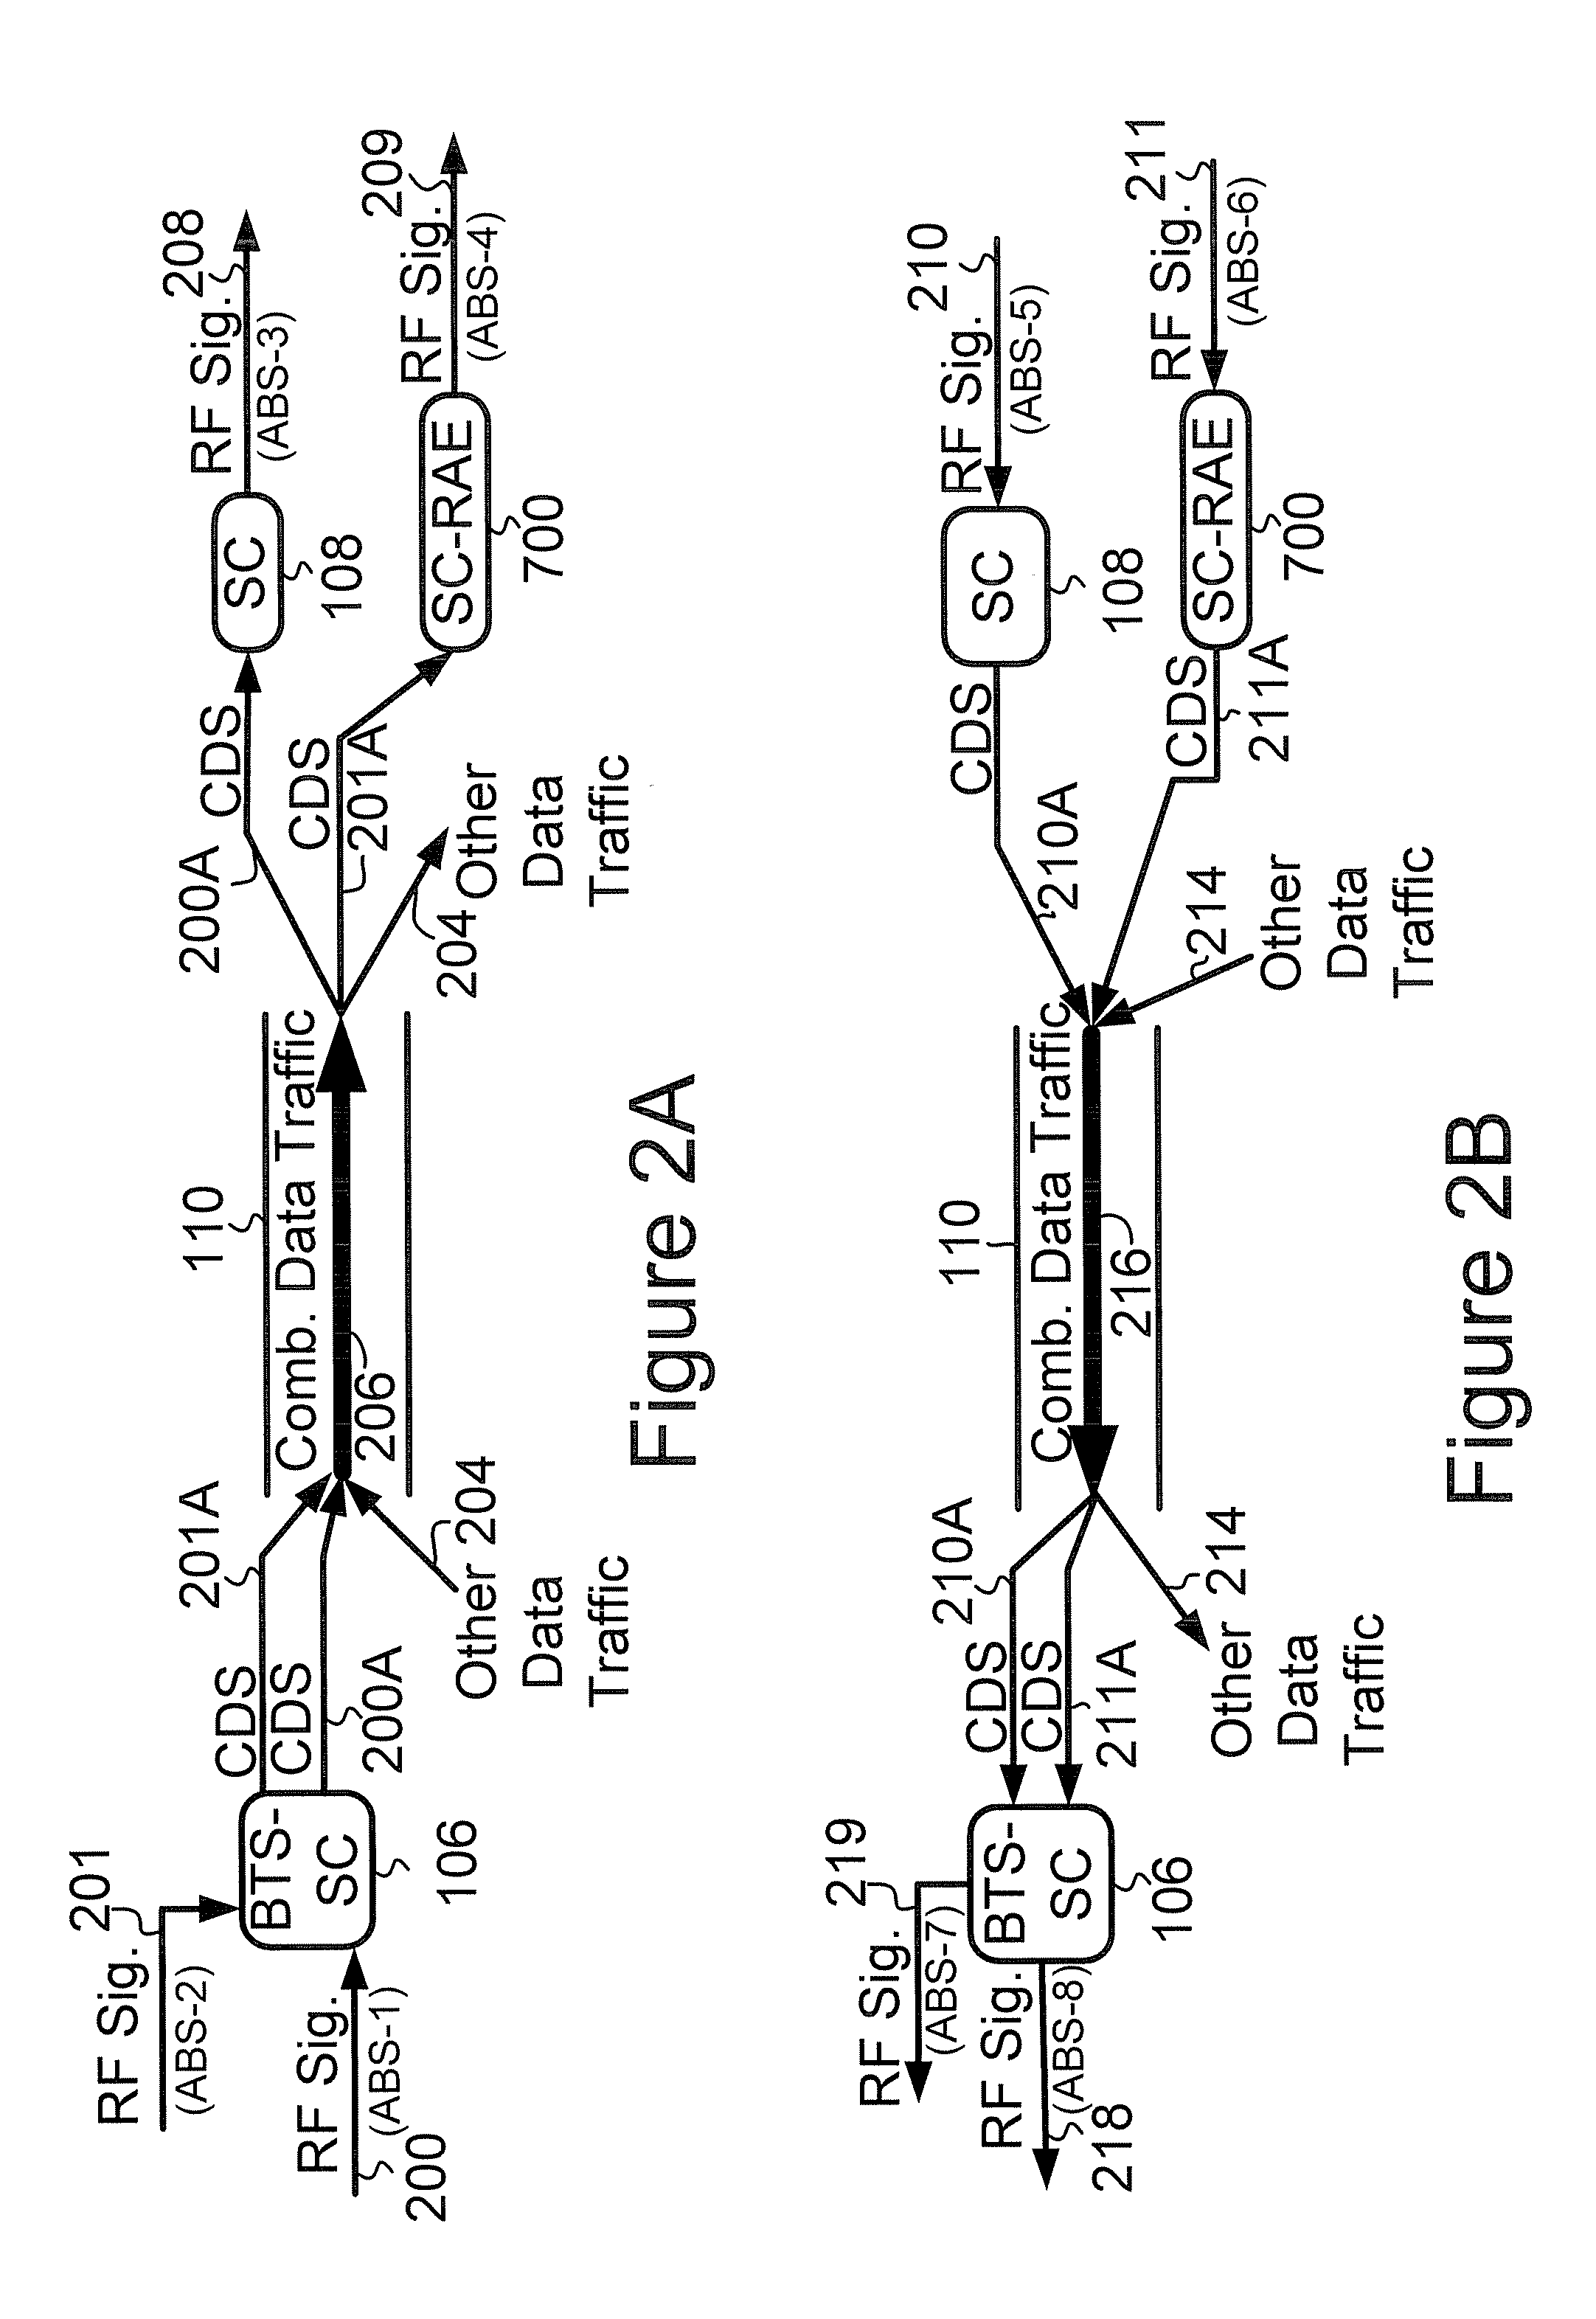 System and method for communicating a combined digital signal for wireless service via integrated hybrid fiber coax and power line communication devices for a distributed antenna system over shared broadband media